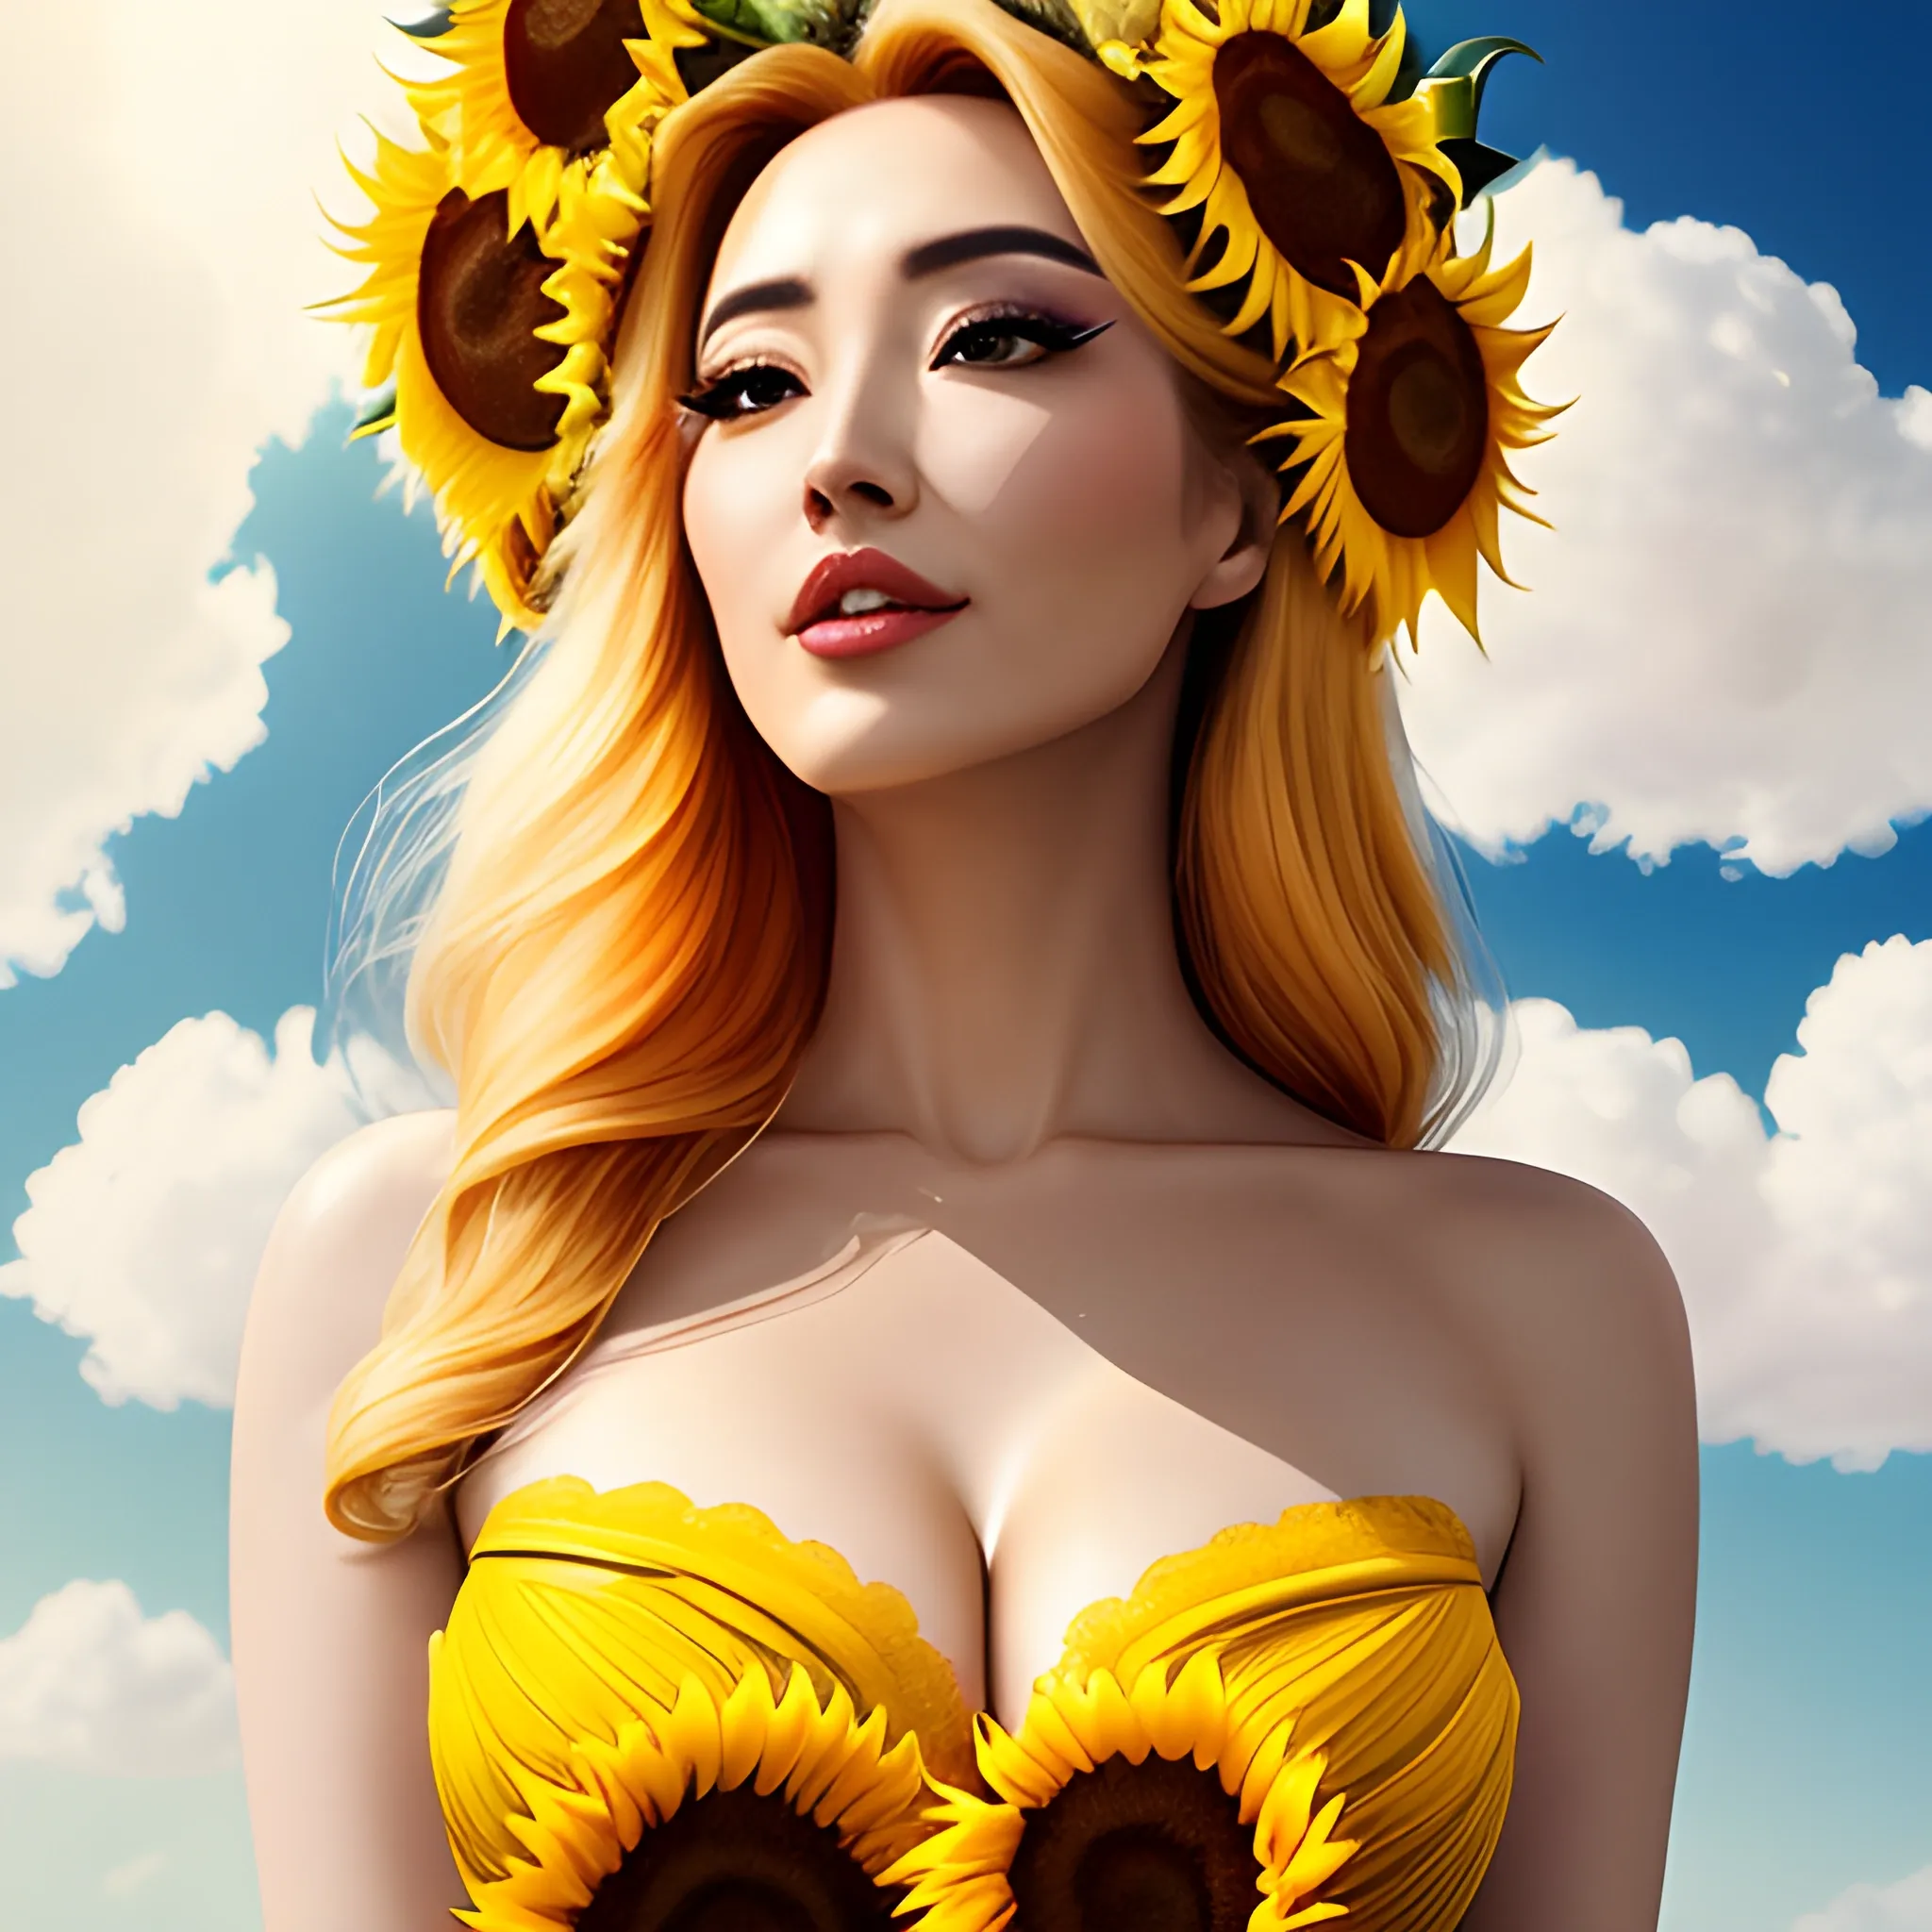 tmasterpiece, high high quality, cinematic Film still from, one-girl,Golden hair,Sunflowers are worn on the head, floating in sky, Cloud Girl, Clouds, (closeup cleavage: 1.1), brightly, cheerfulness, intriguing, gentlesoftlighting, (bauhause, Shape, lineworks, abstracted: 1.1), asian